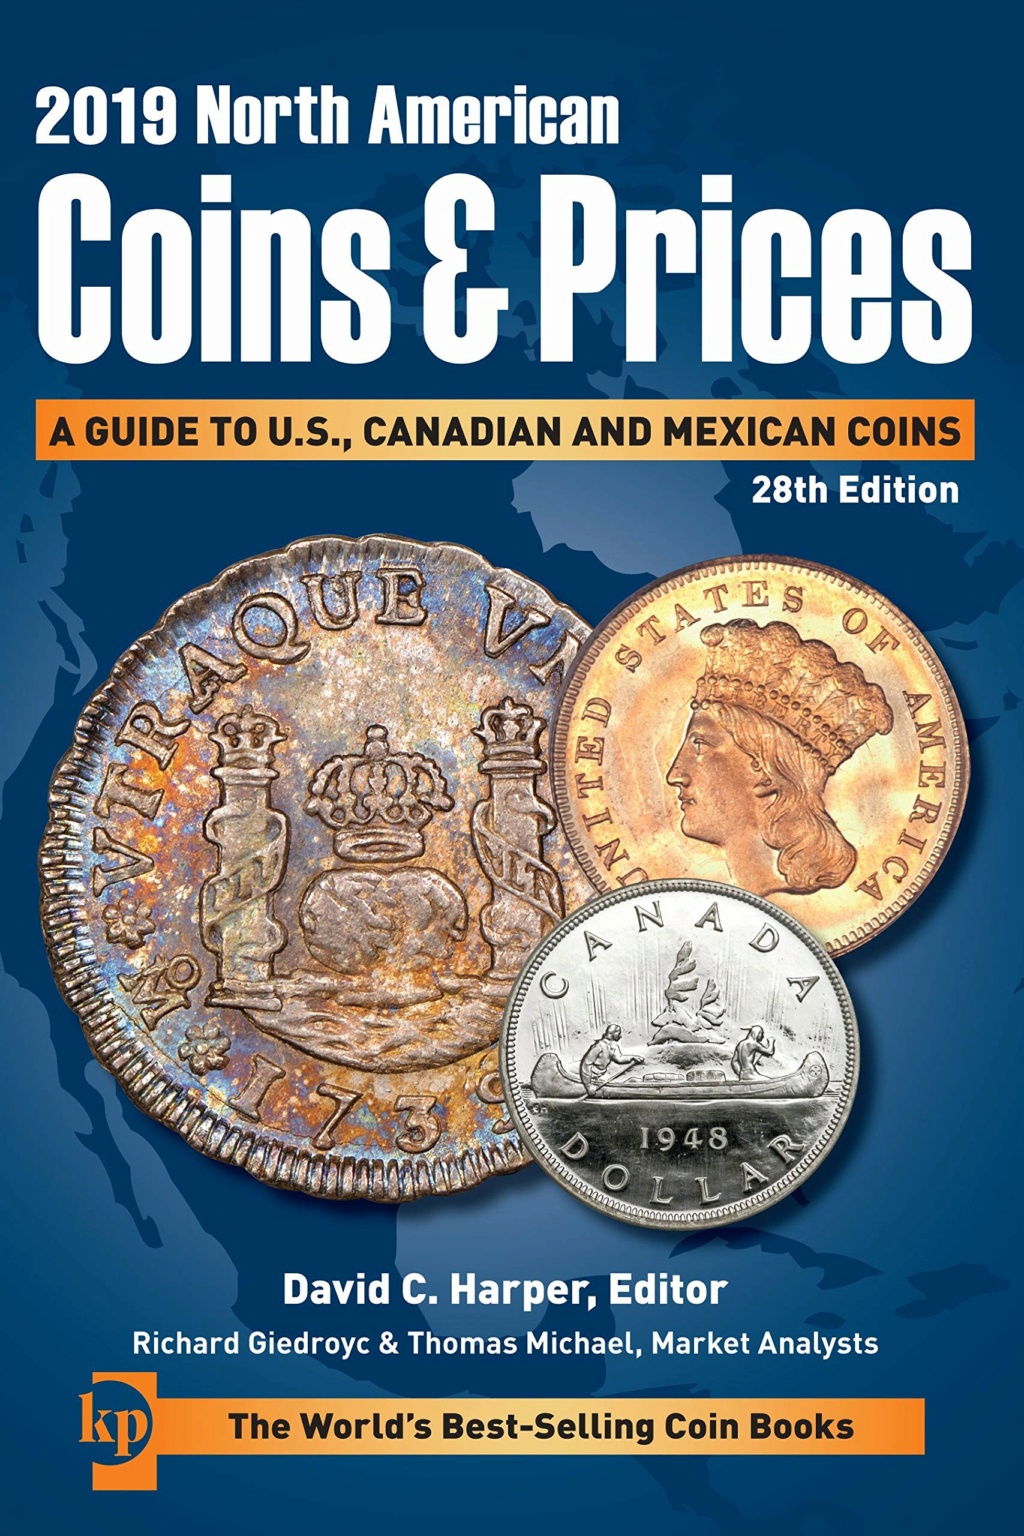 Coins and prices 2019 pdf 91xmum10